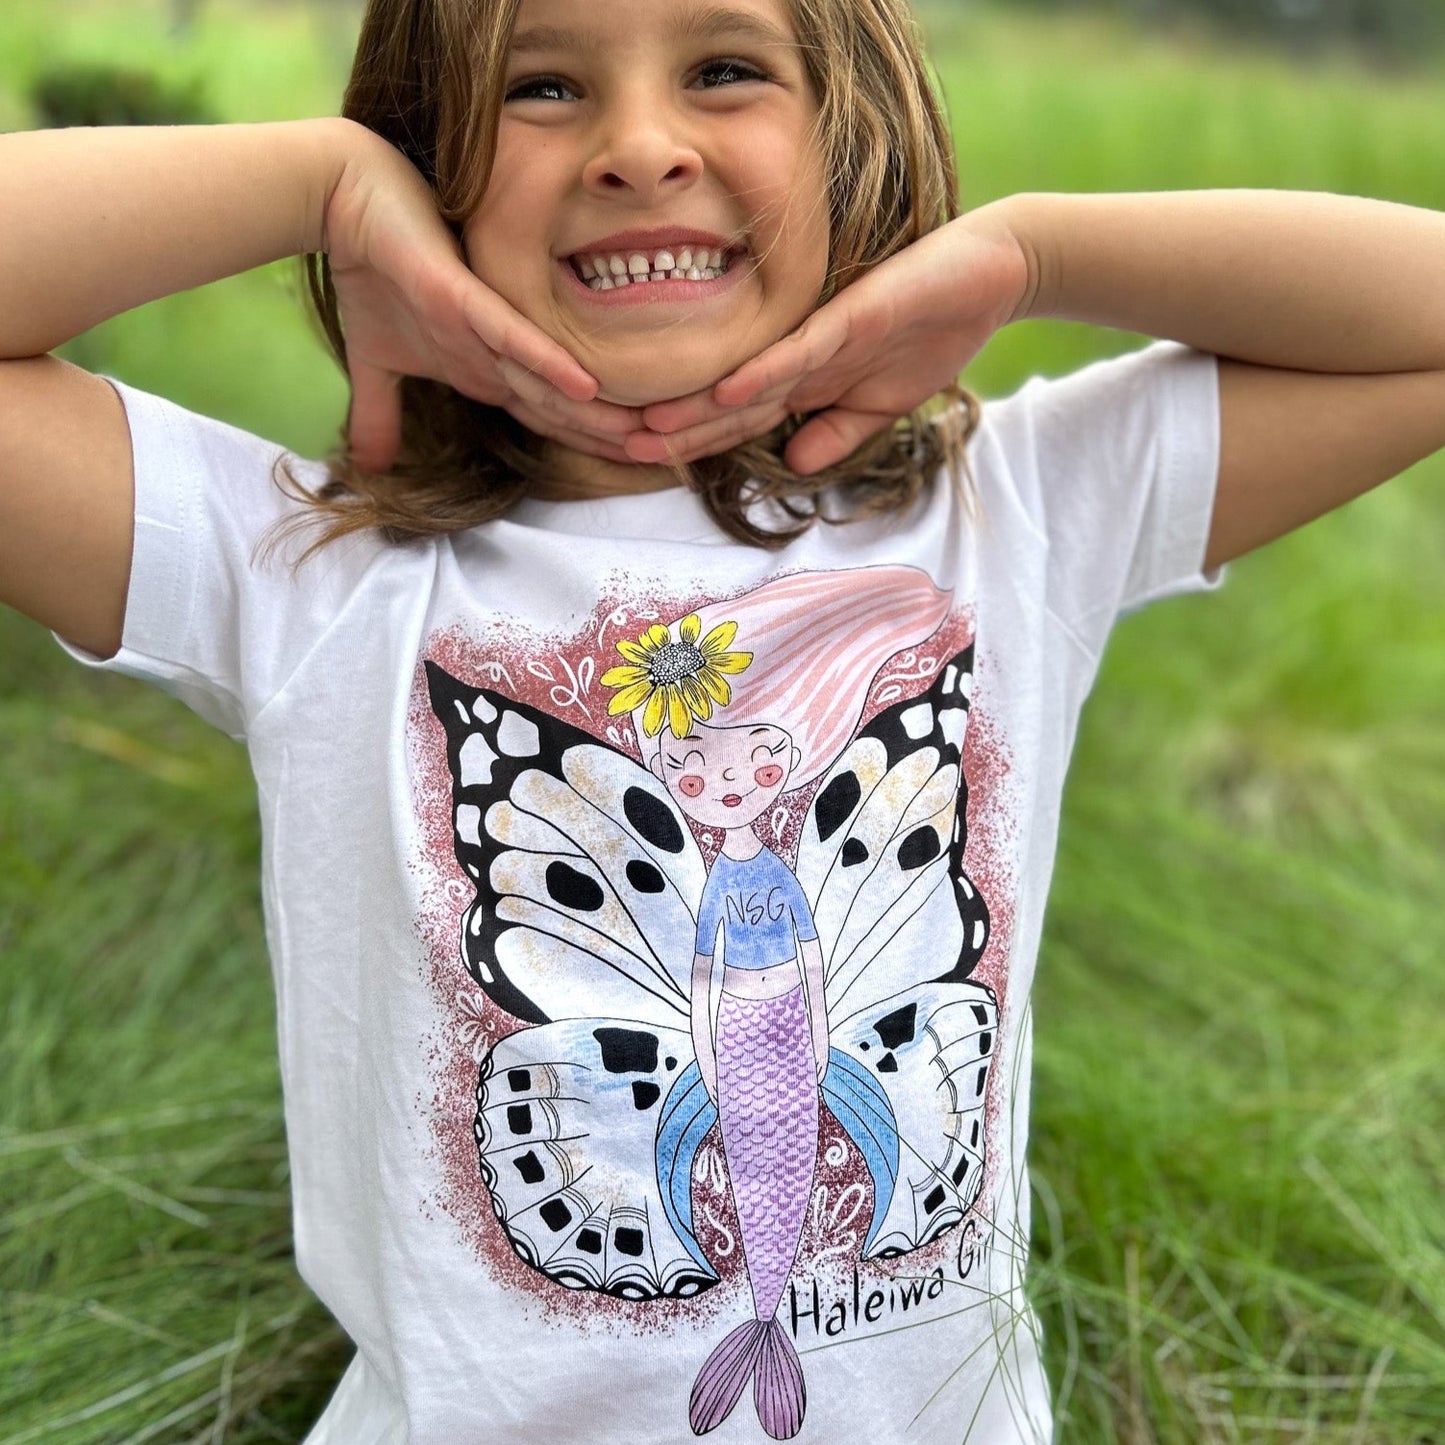 Haleiwa Butterfly Mermaid Illustrated Handmade Graphic Tee for Girls. North Shore Girls graphic t-shirt collection for kids. Youth sizes from 6 to 18 year old. Surf beach style shirt for the little mermaid lovers